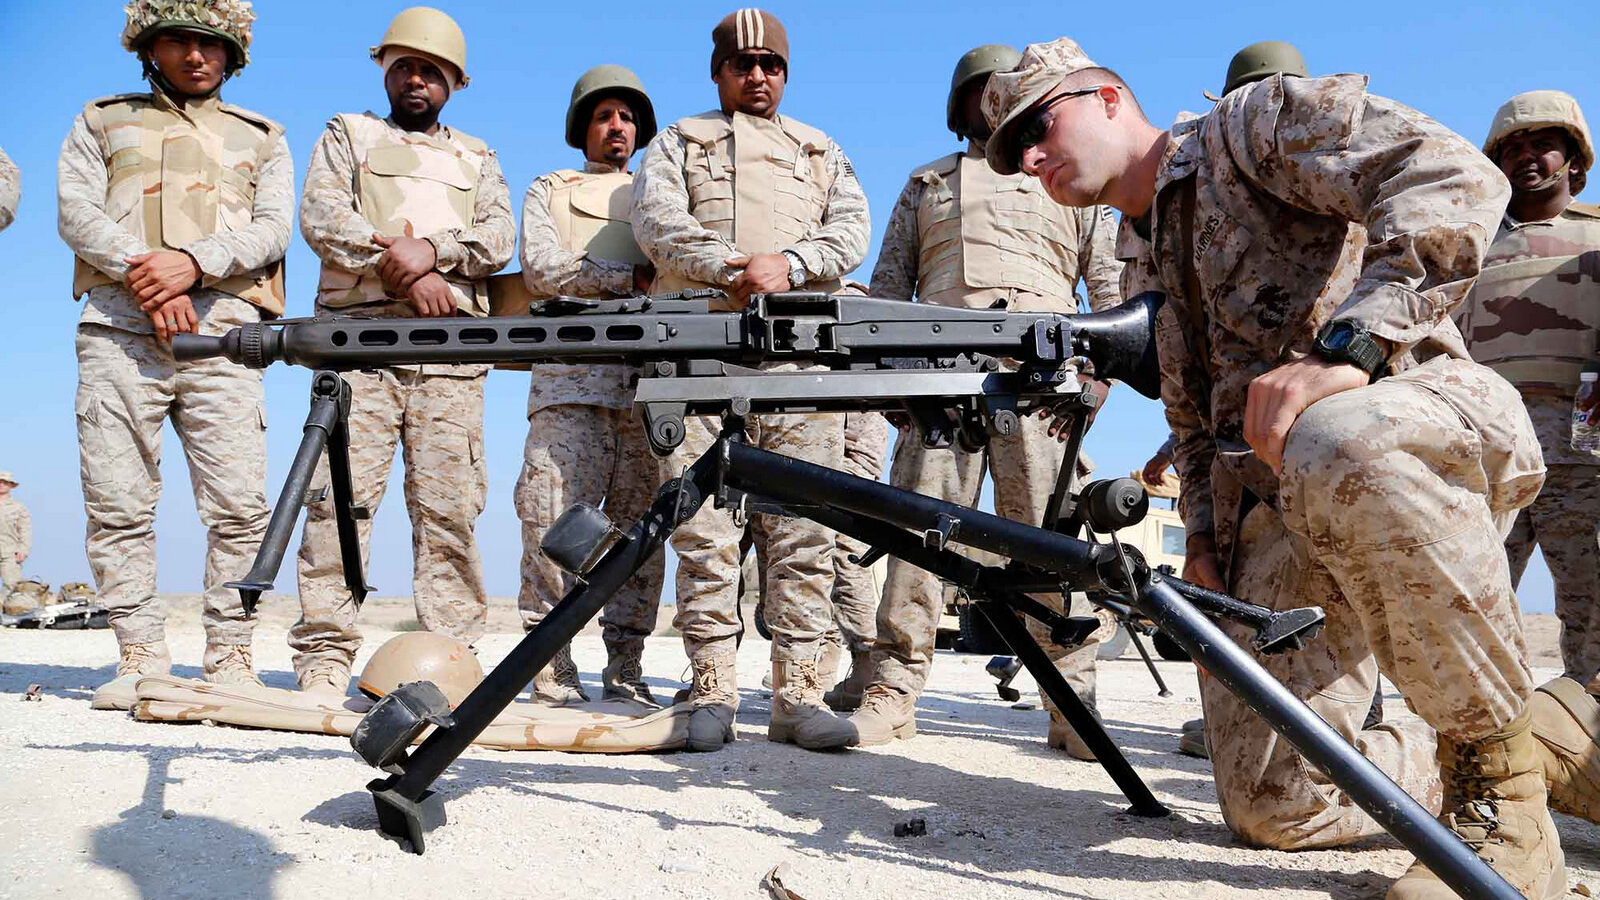 A U.S. Marine teaches Saudi Naval Forces how to use a MG-42 machine gun during exercise Red Reef 15. Rome M. Lazarus | US Marine Corp